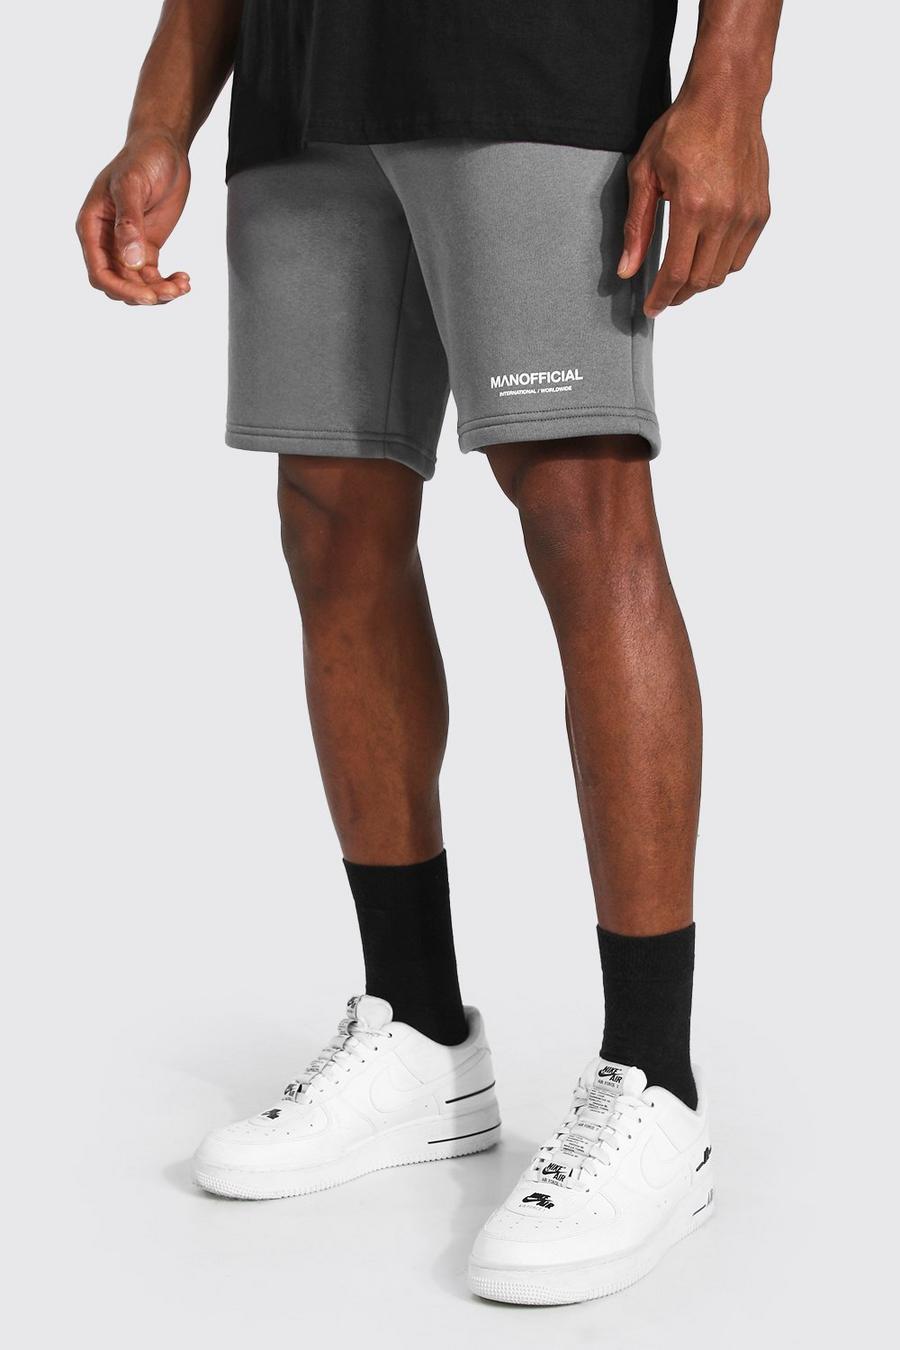 Charcoal Man Official Waistband Slim Mid Jersey Short image number 1